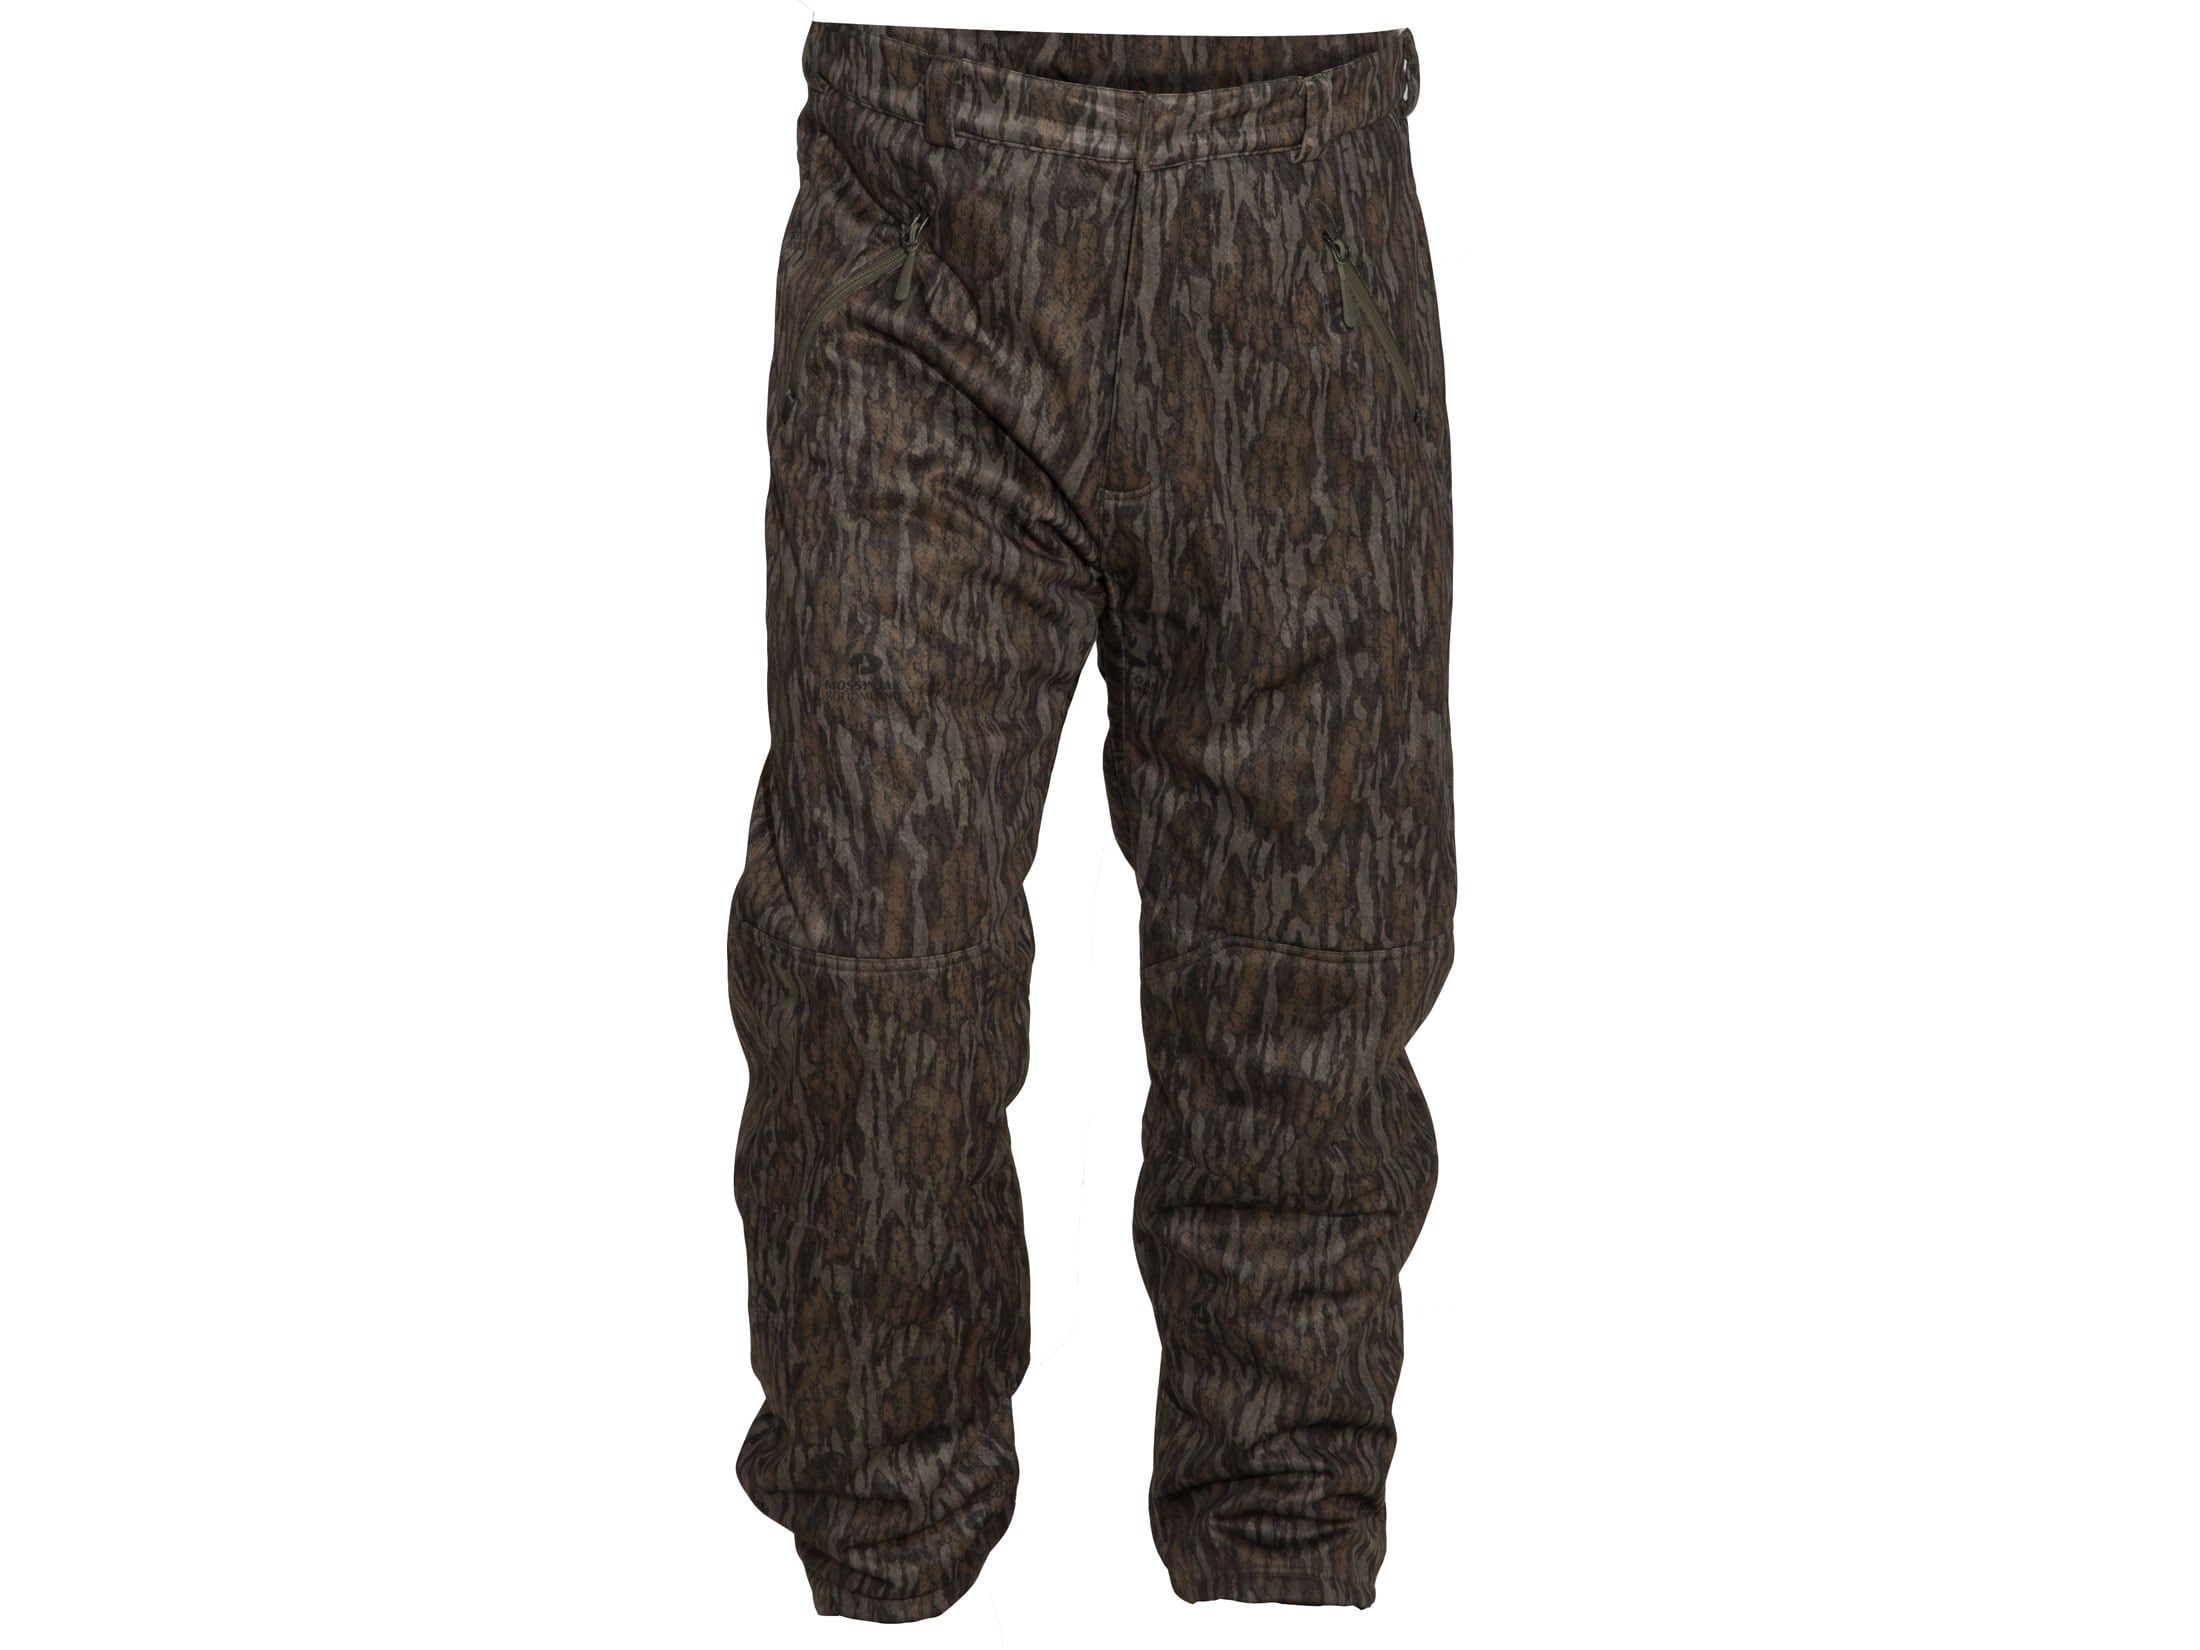 Banded Men's White River Insulated Wader Pants Polyester Mossy Oak